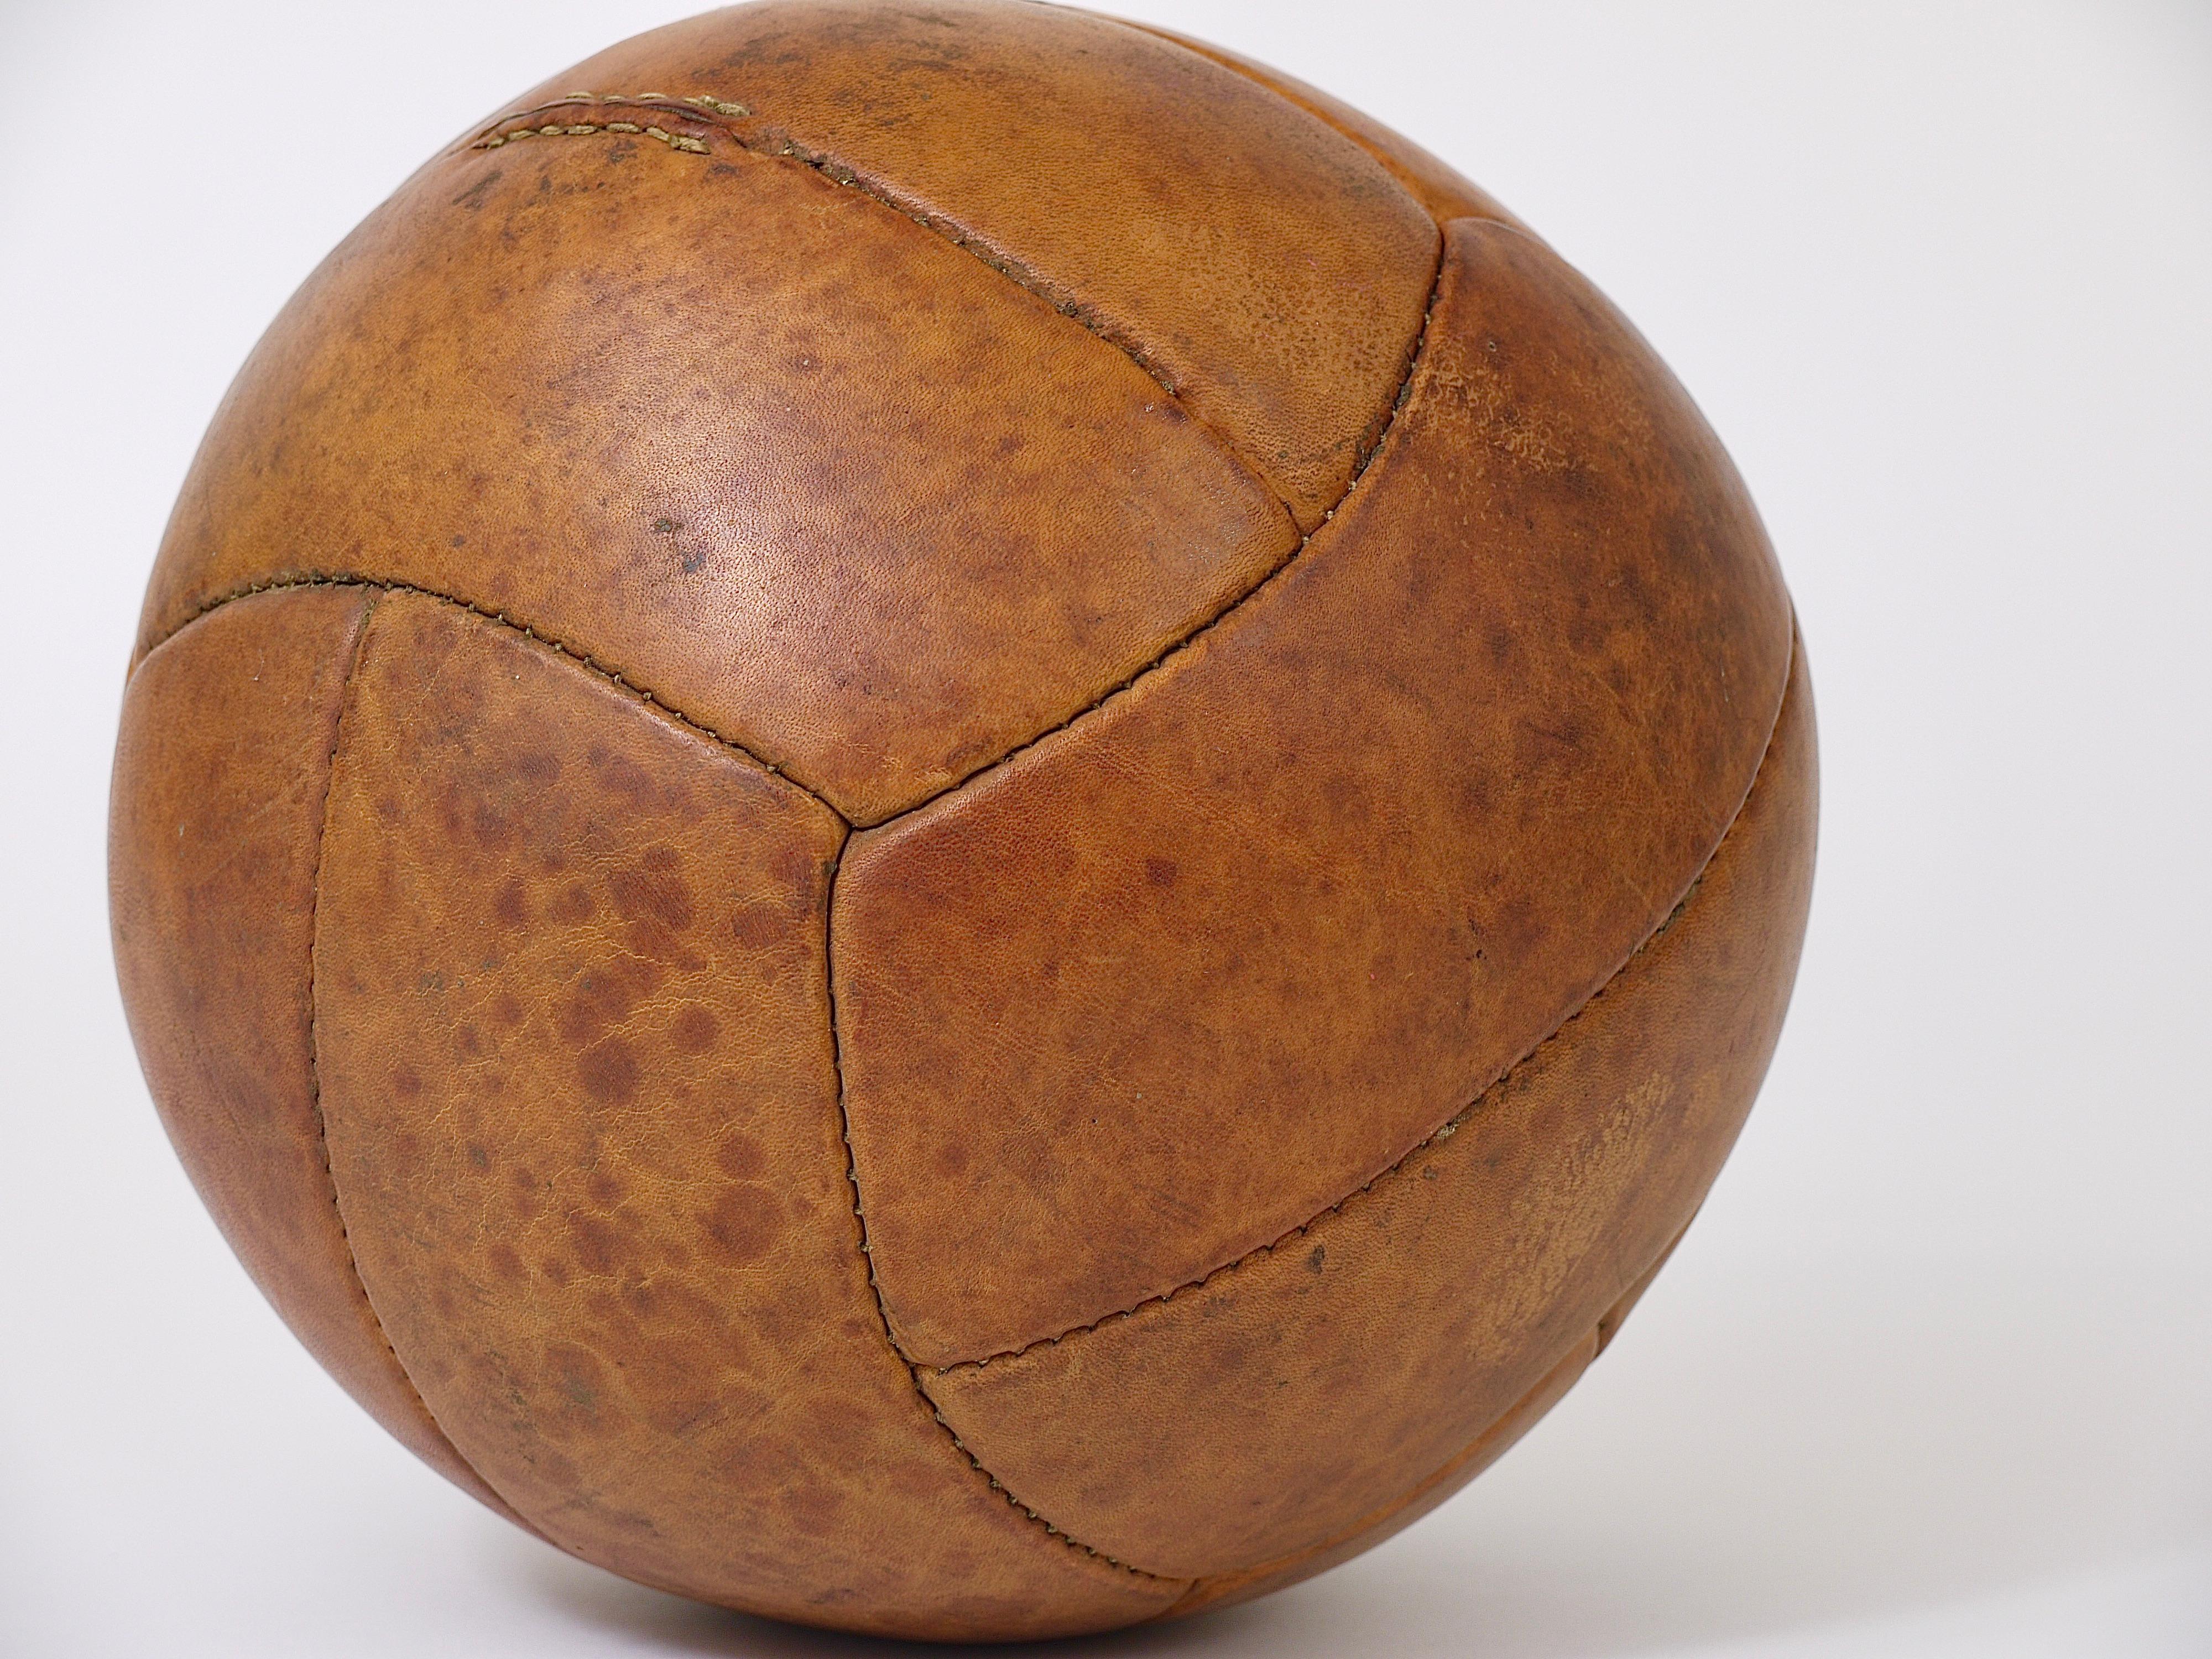 Art Deco Vintage 1930s Tan Leather Medicine Ball from a Gym, Czech Republic, 1930s